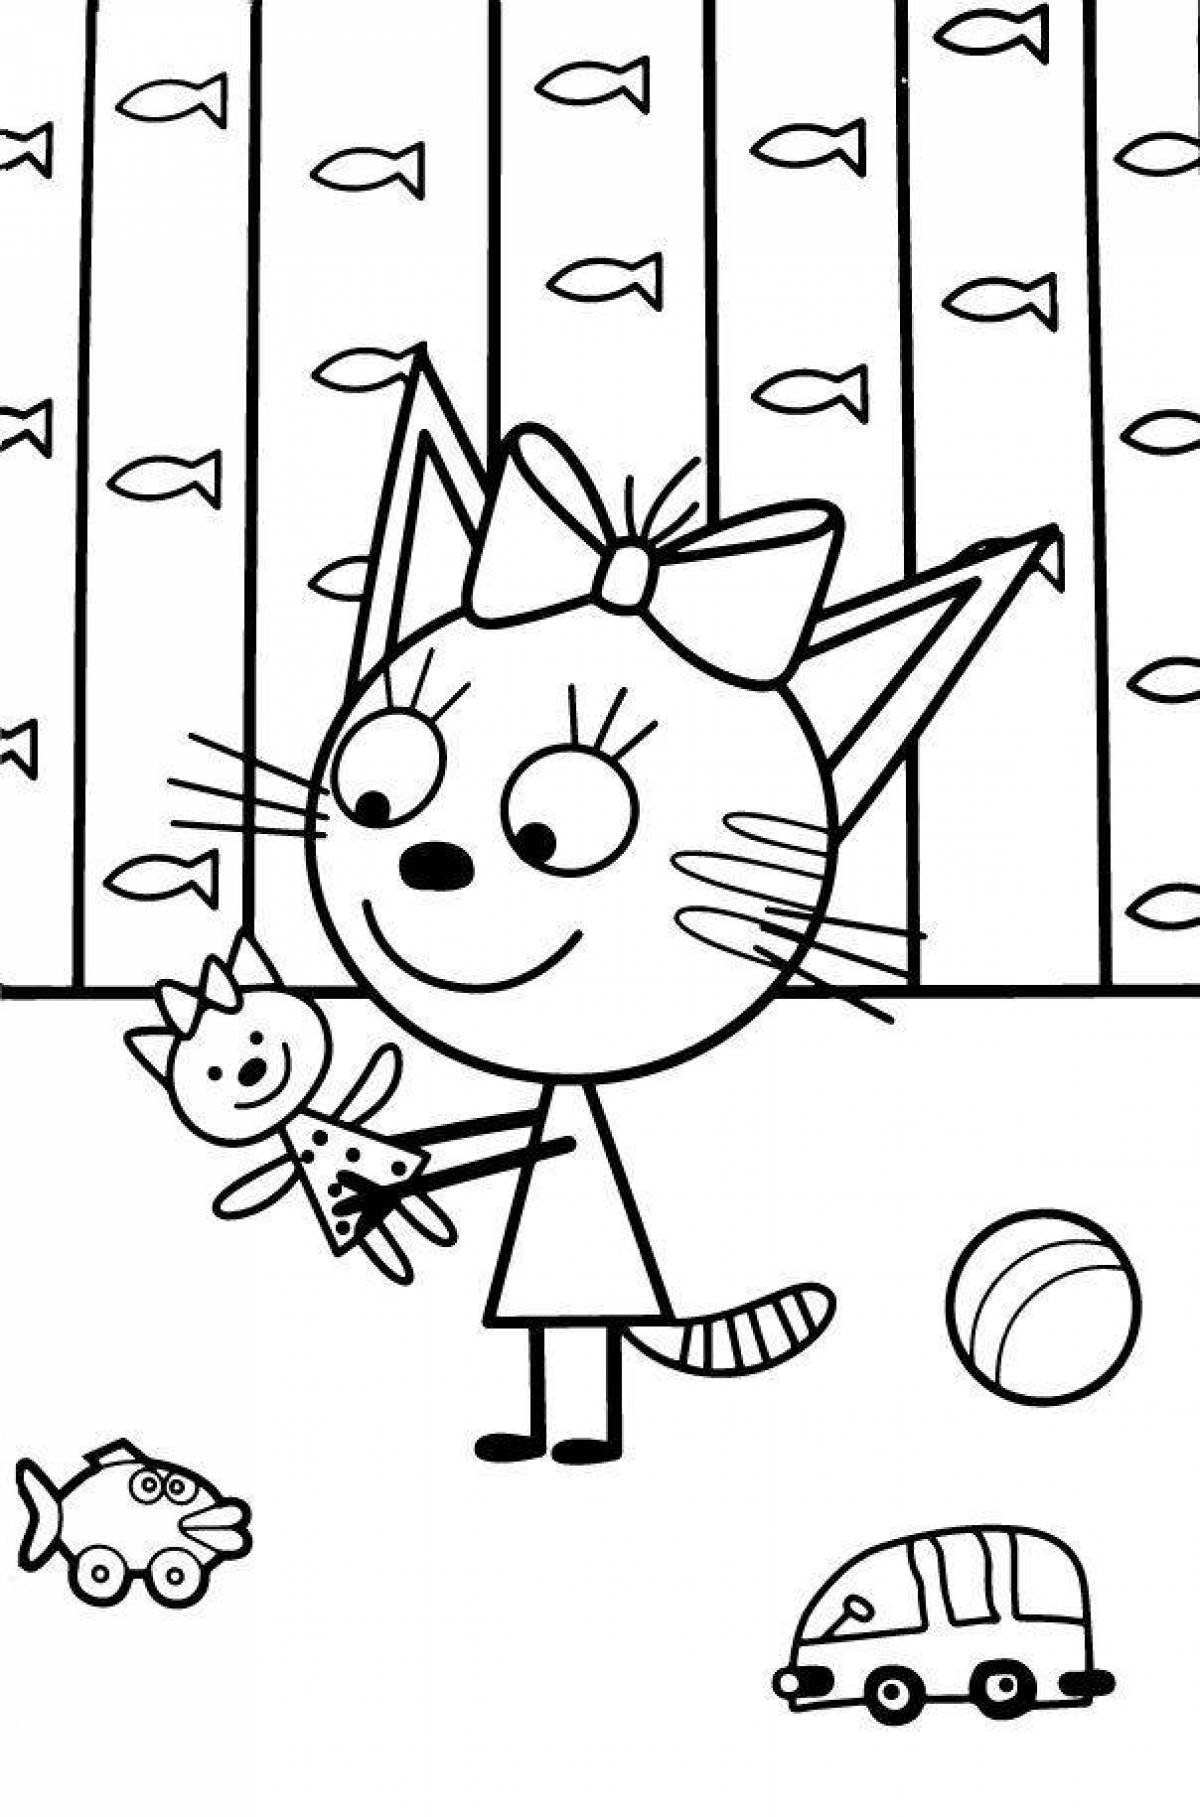 Sky caramel coloring page